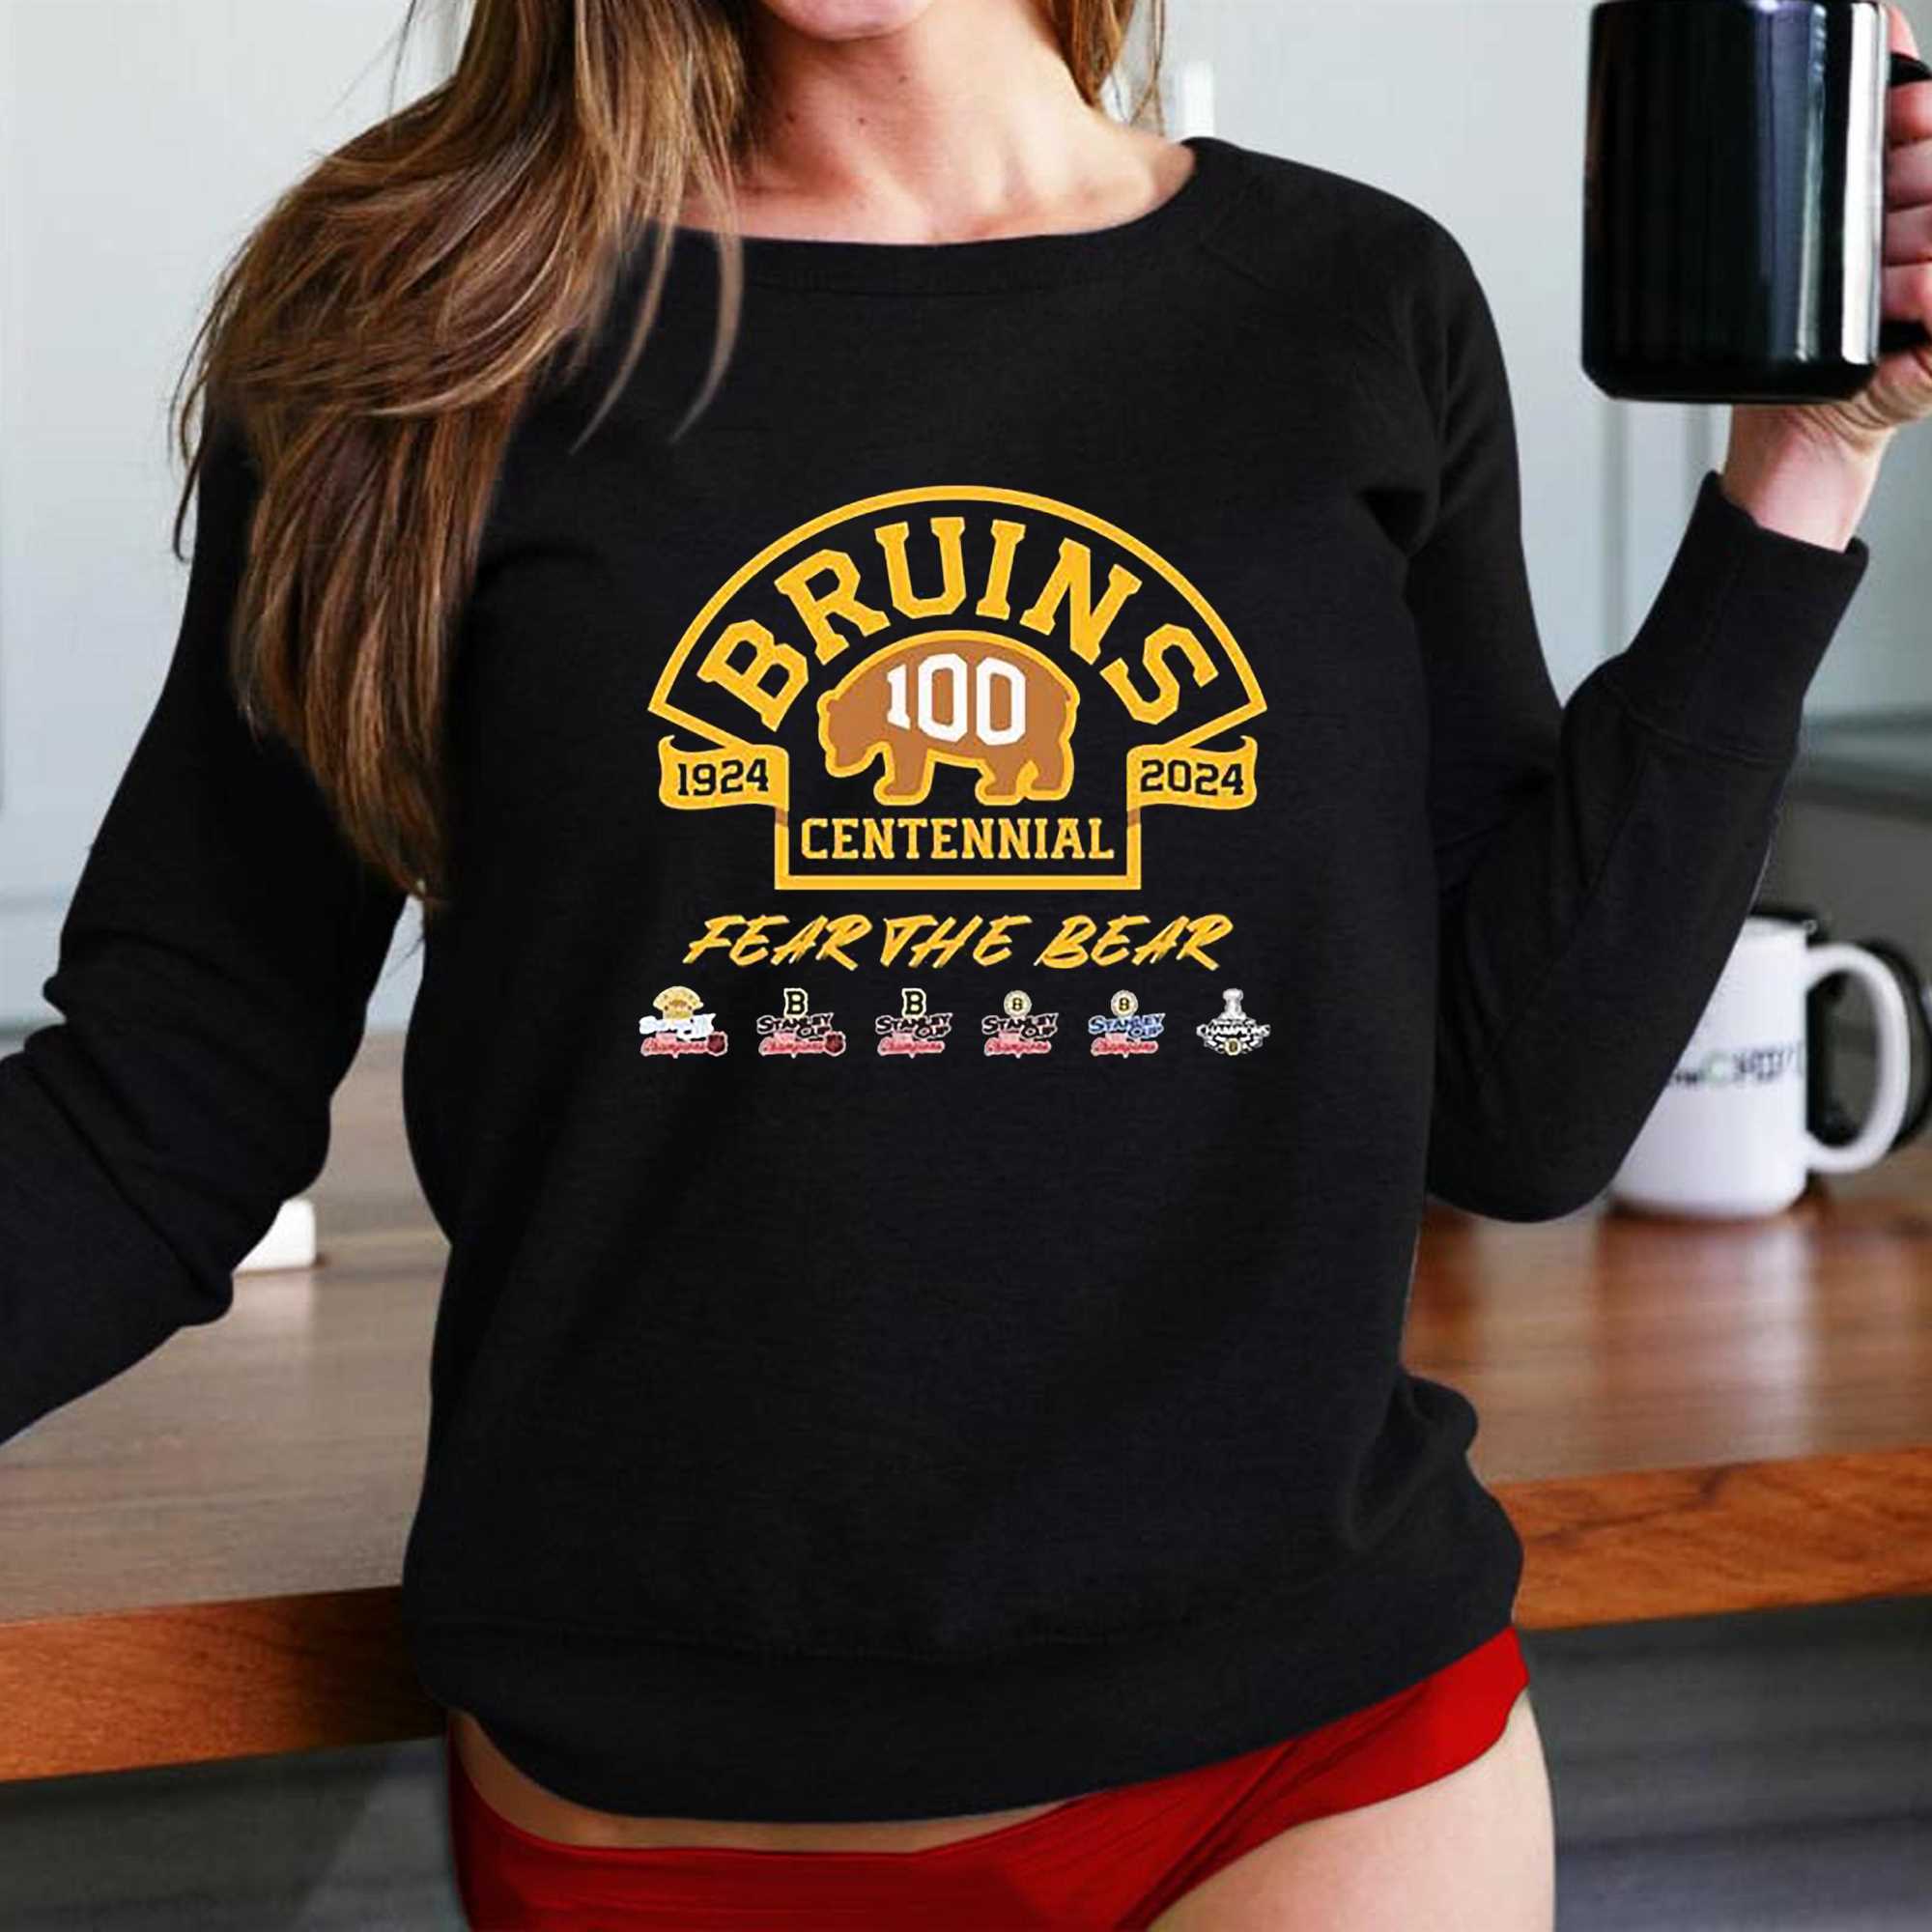 BOSTON BRUINS We Want the Cup  Beware of the Bear!" (LG) T-Shirt